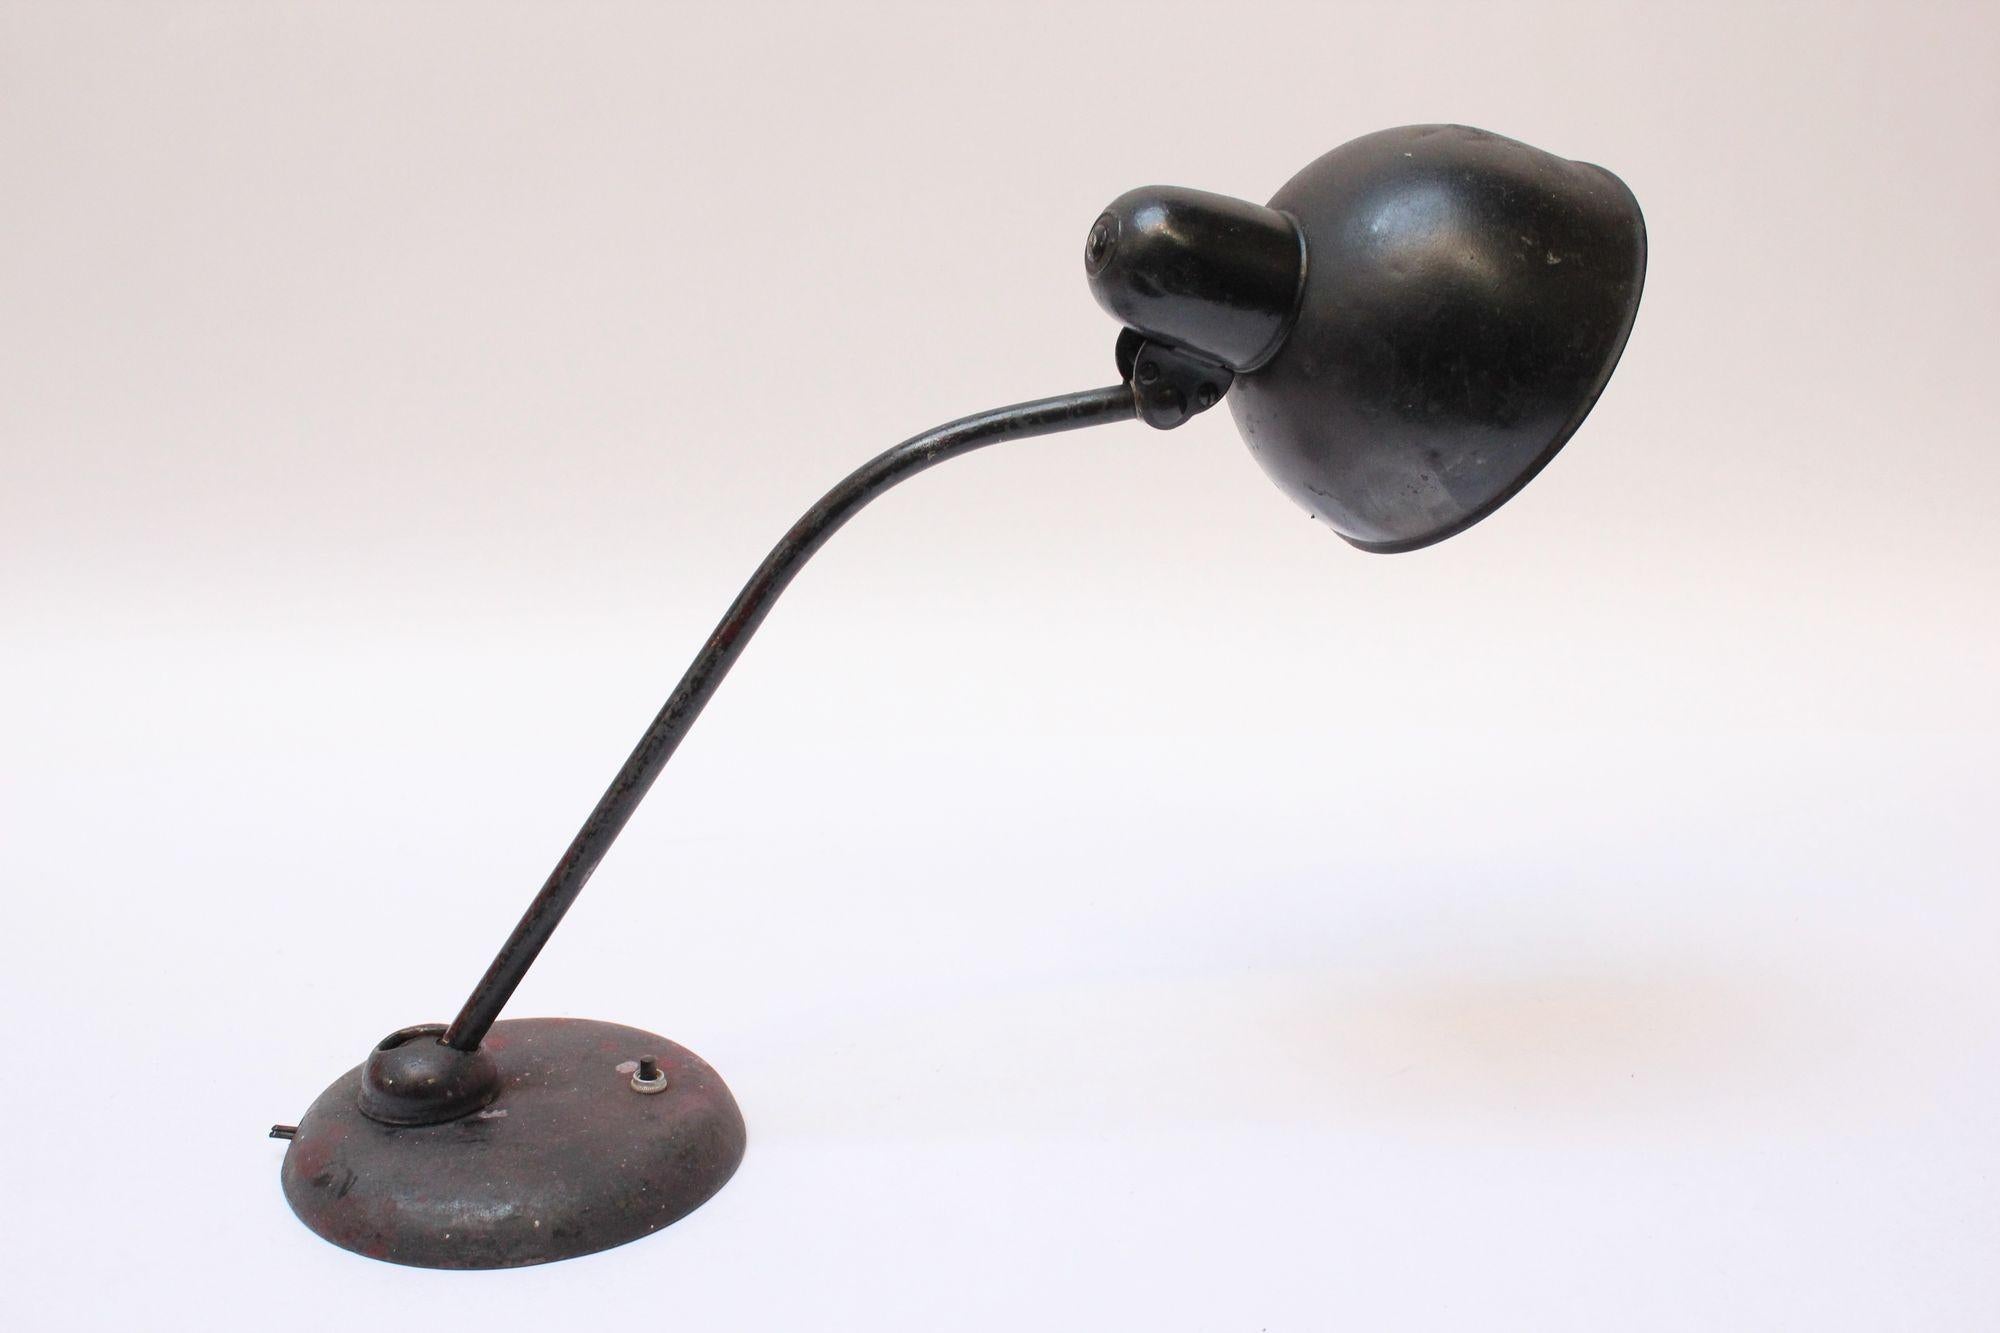 Desk/table lamp featuring an enameled metal shade and painted round metal base, circa 1930s. 
Features an adjustable shade and stem.
Naturally distressed condition showing paint marks, dents, and scratches. Visibly repainted at one point. Remains a